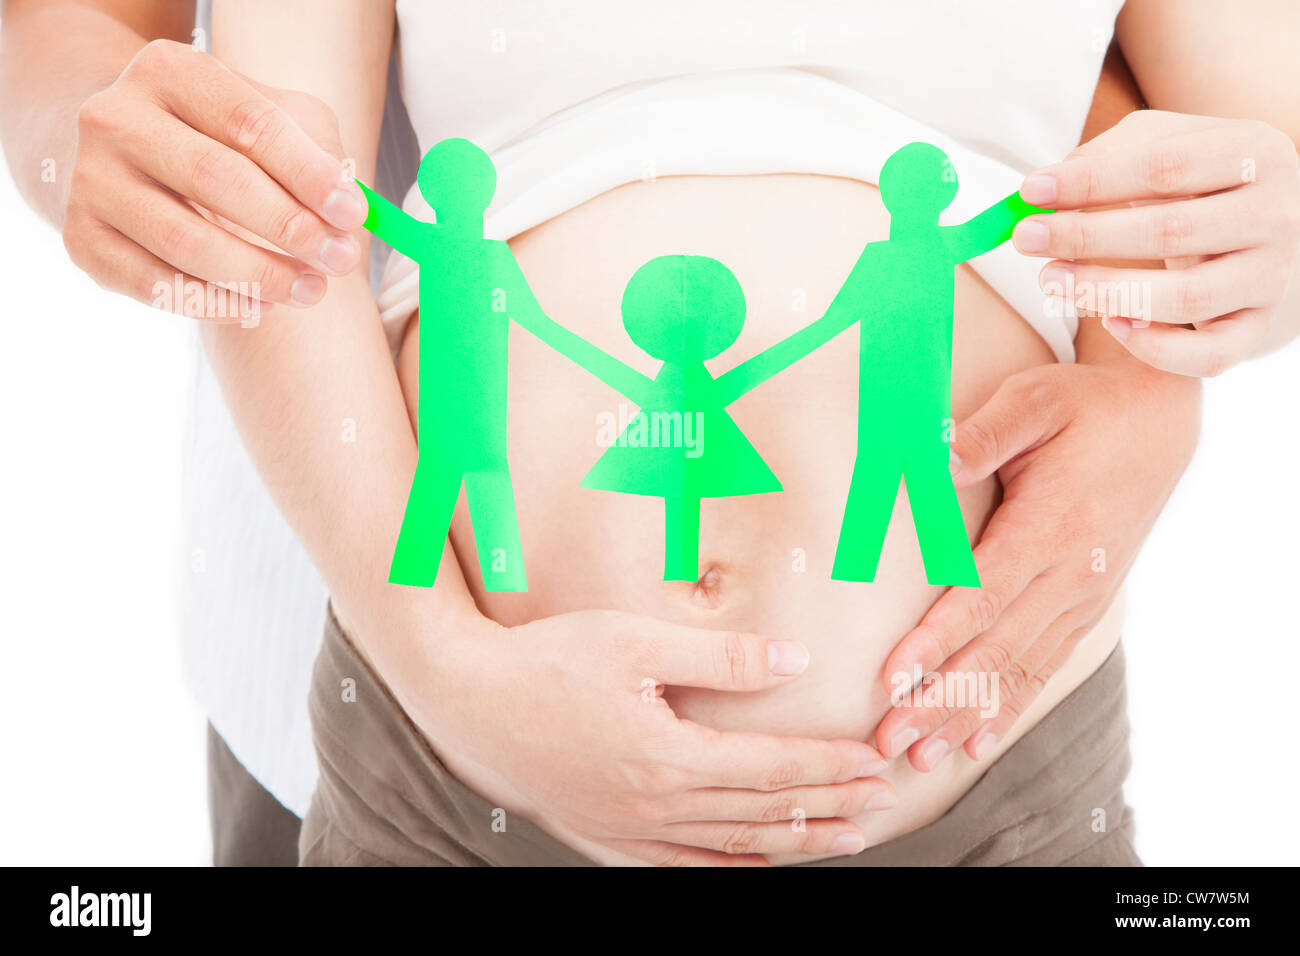 hand of pregnant woman and man for family concept Stock Photo